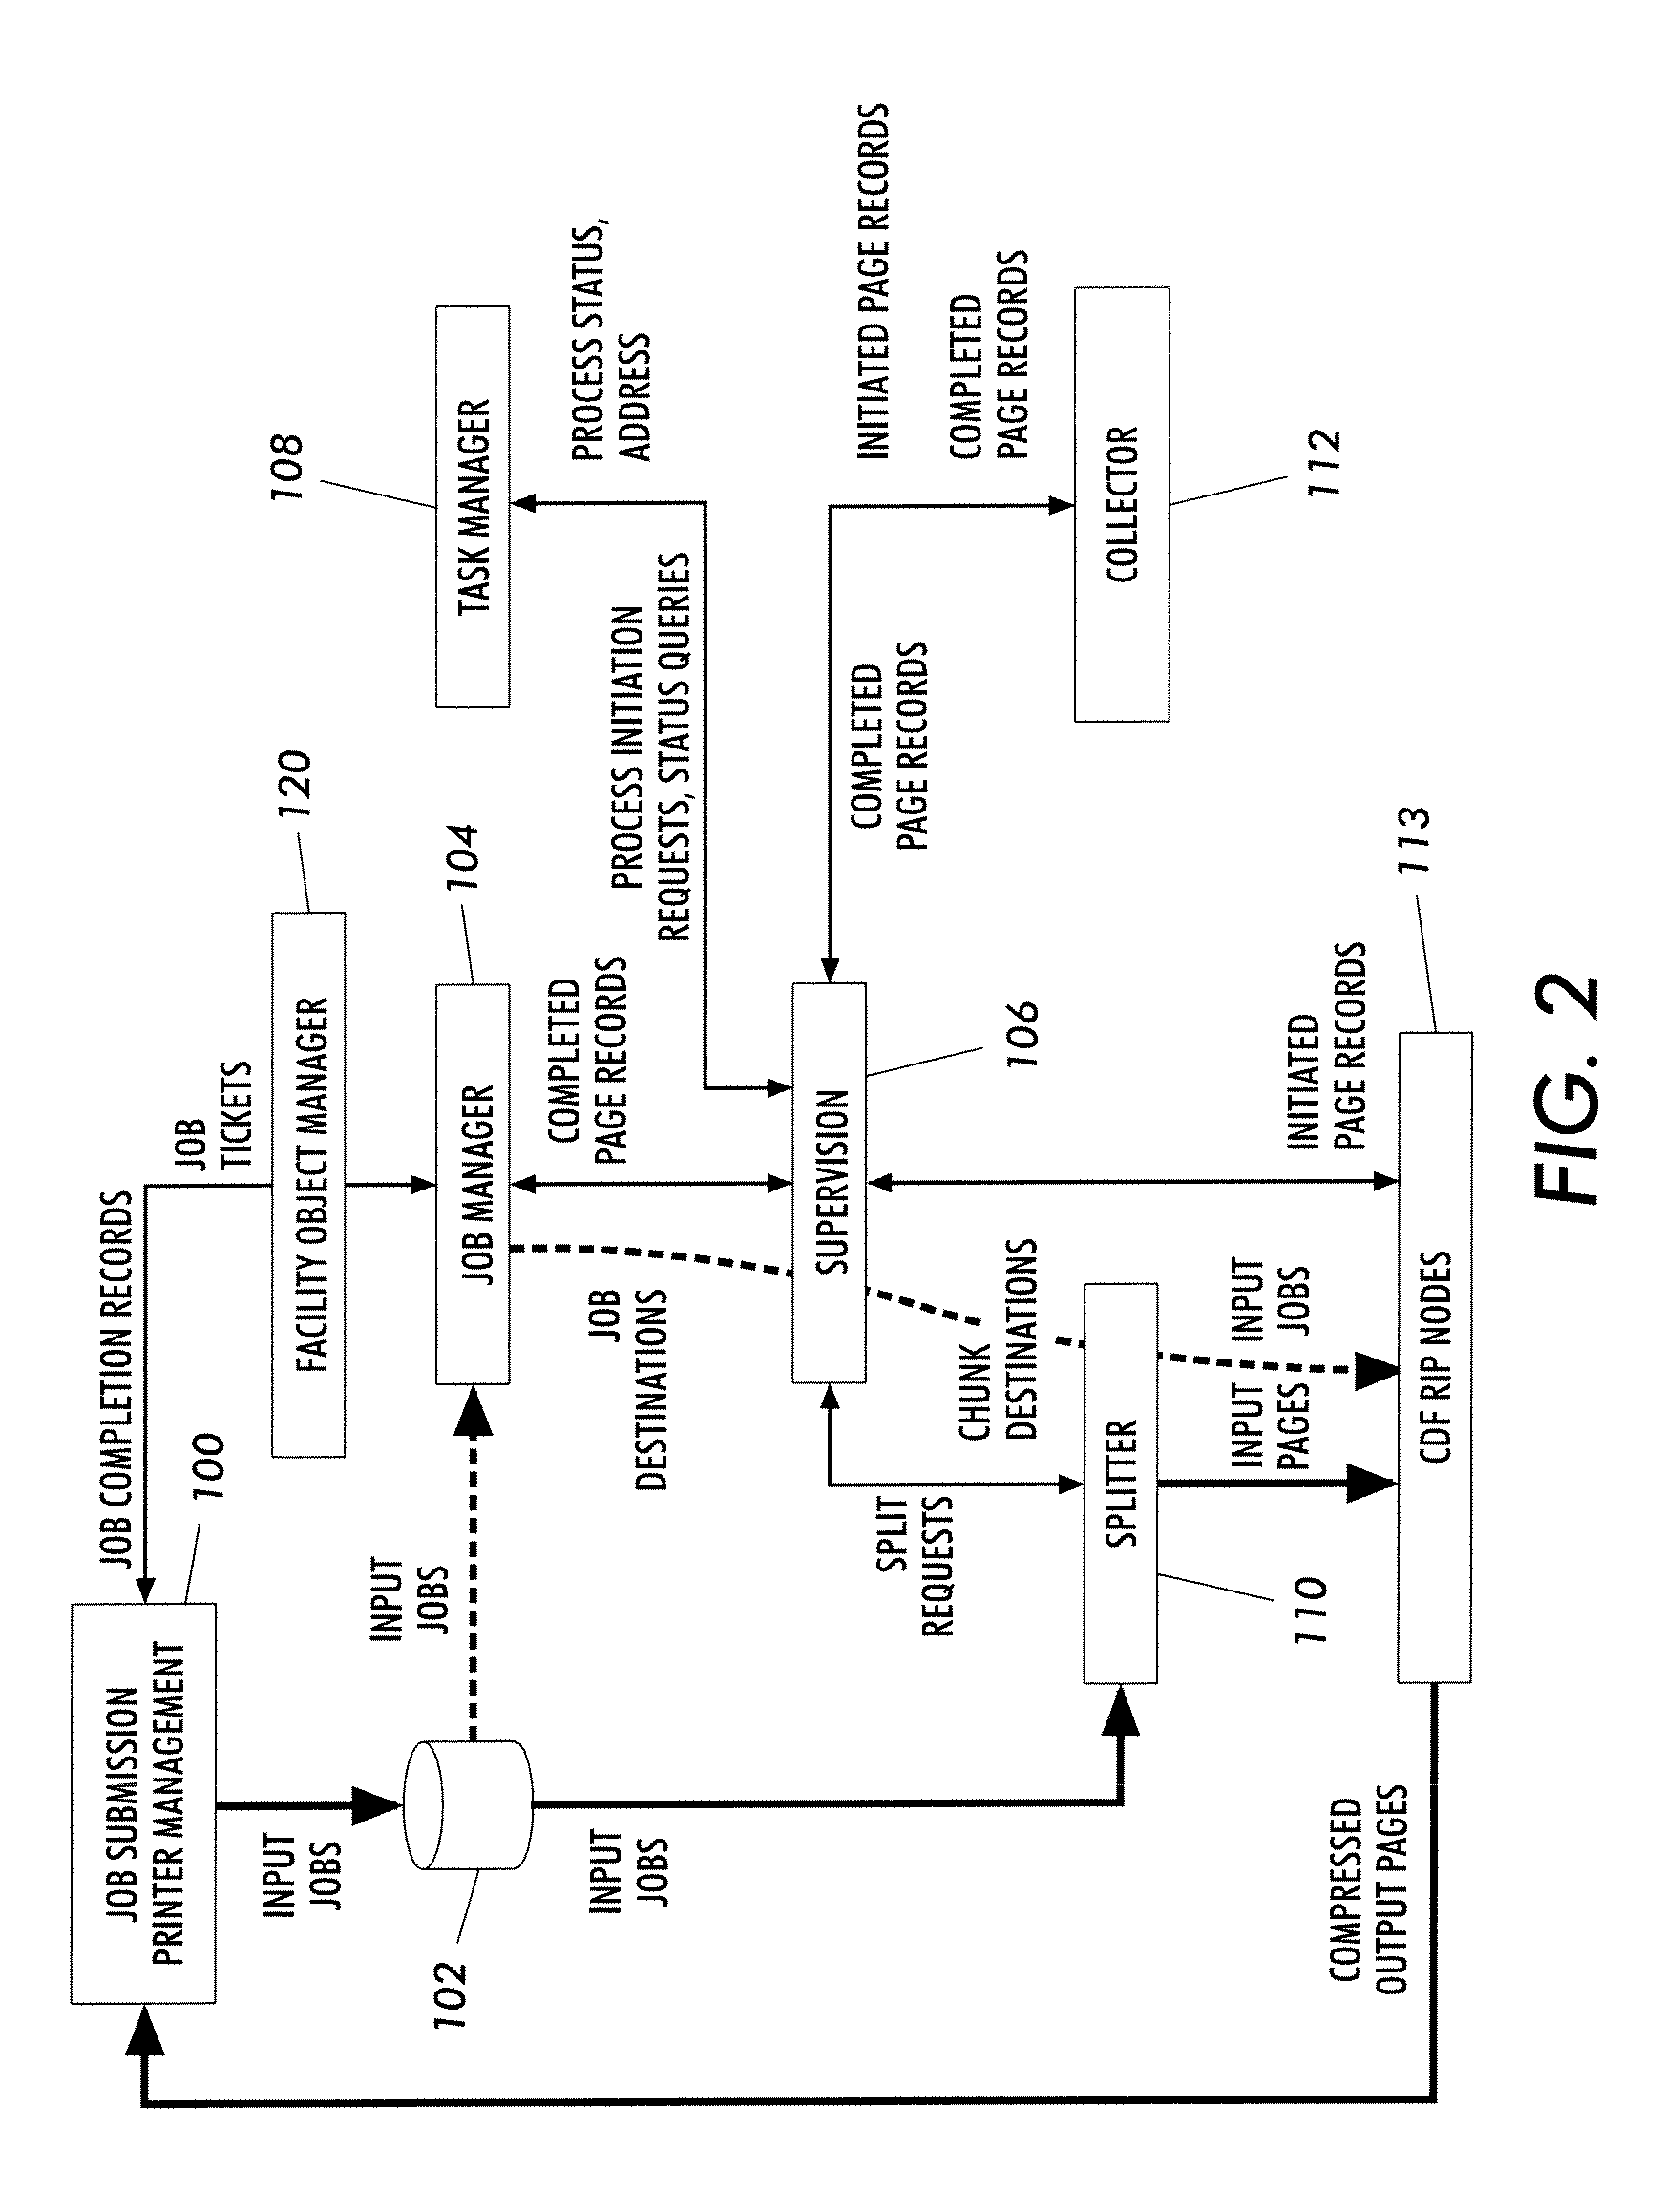 Parallel printing system having flow control in a virtual disk transfer system